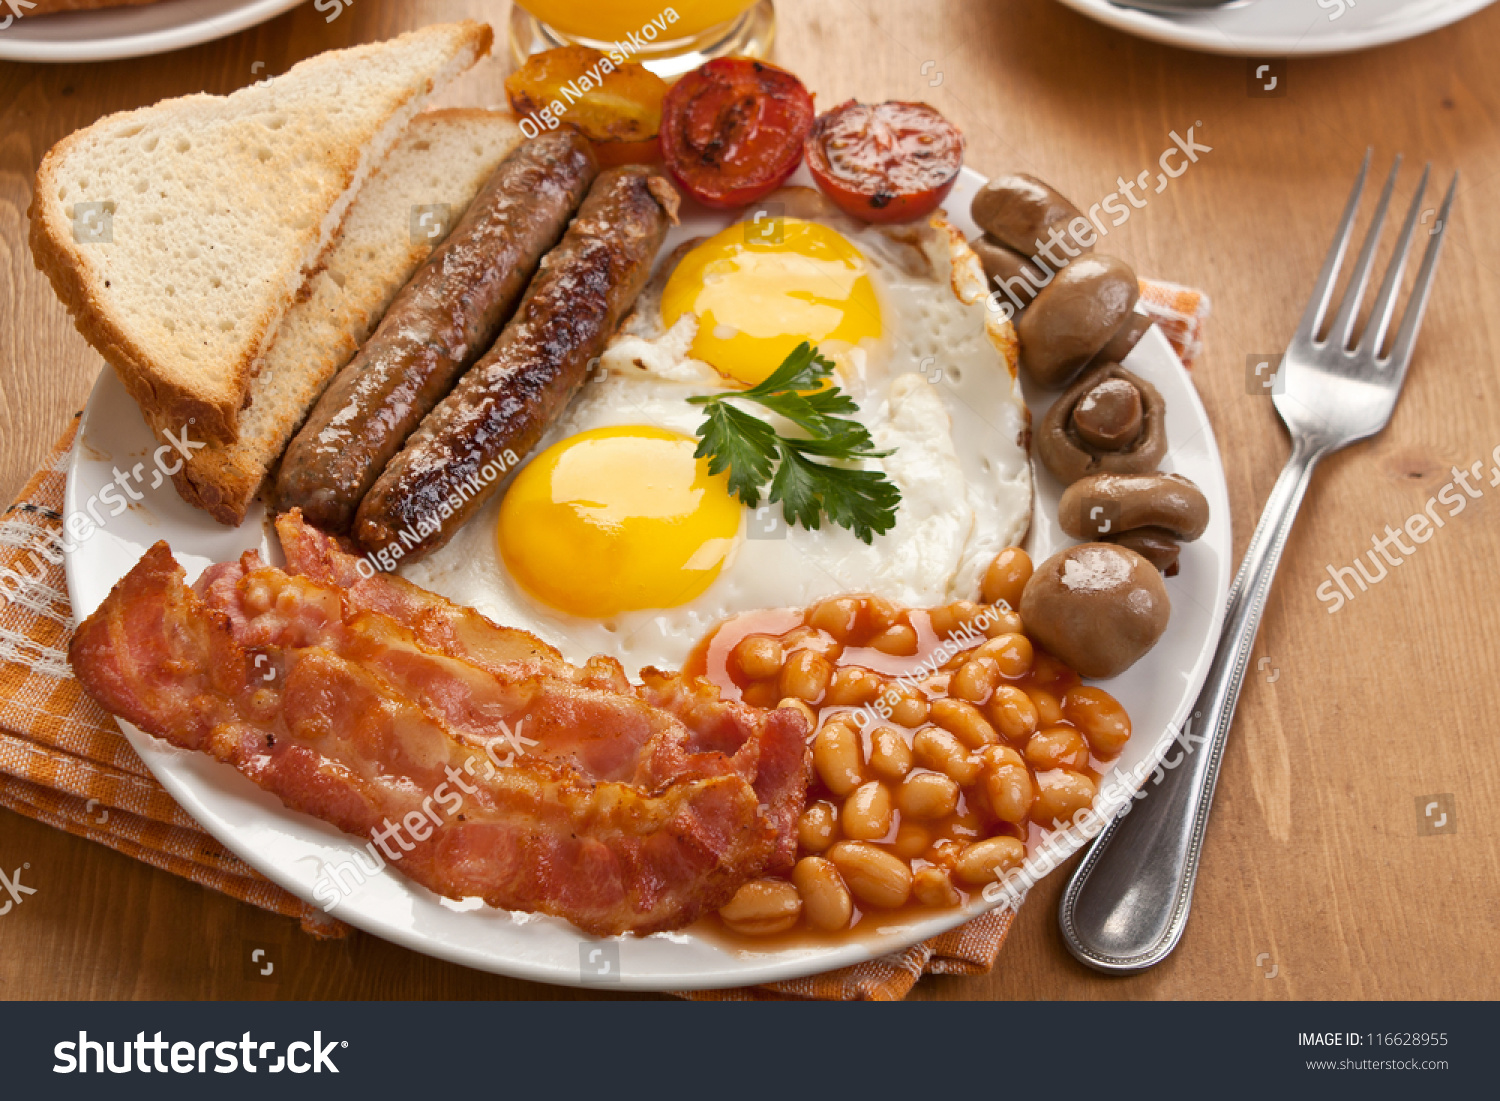 image.shutterstock.com/z/stock-photo-traditional-english-breakfast-egg-sausages-beans-and-bacon-116628955.jpg